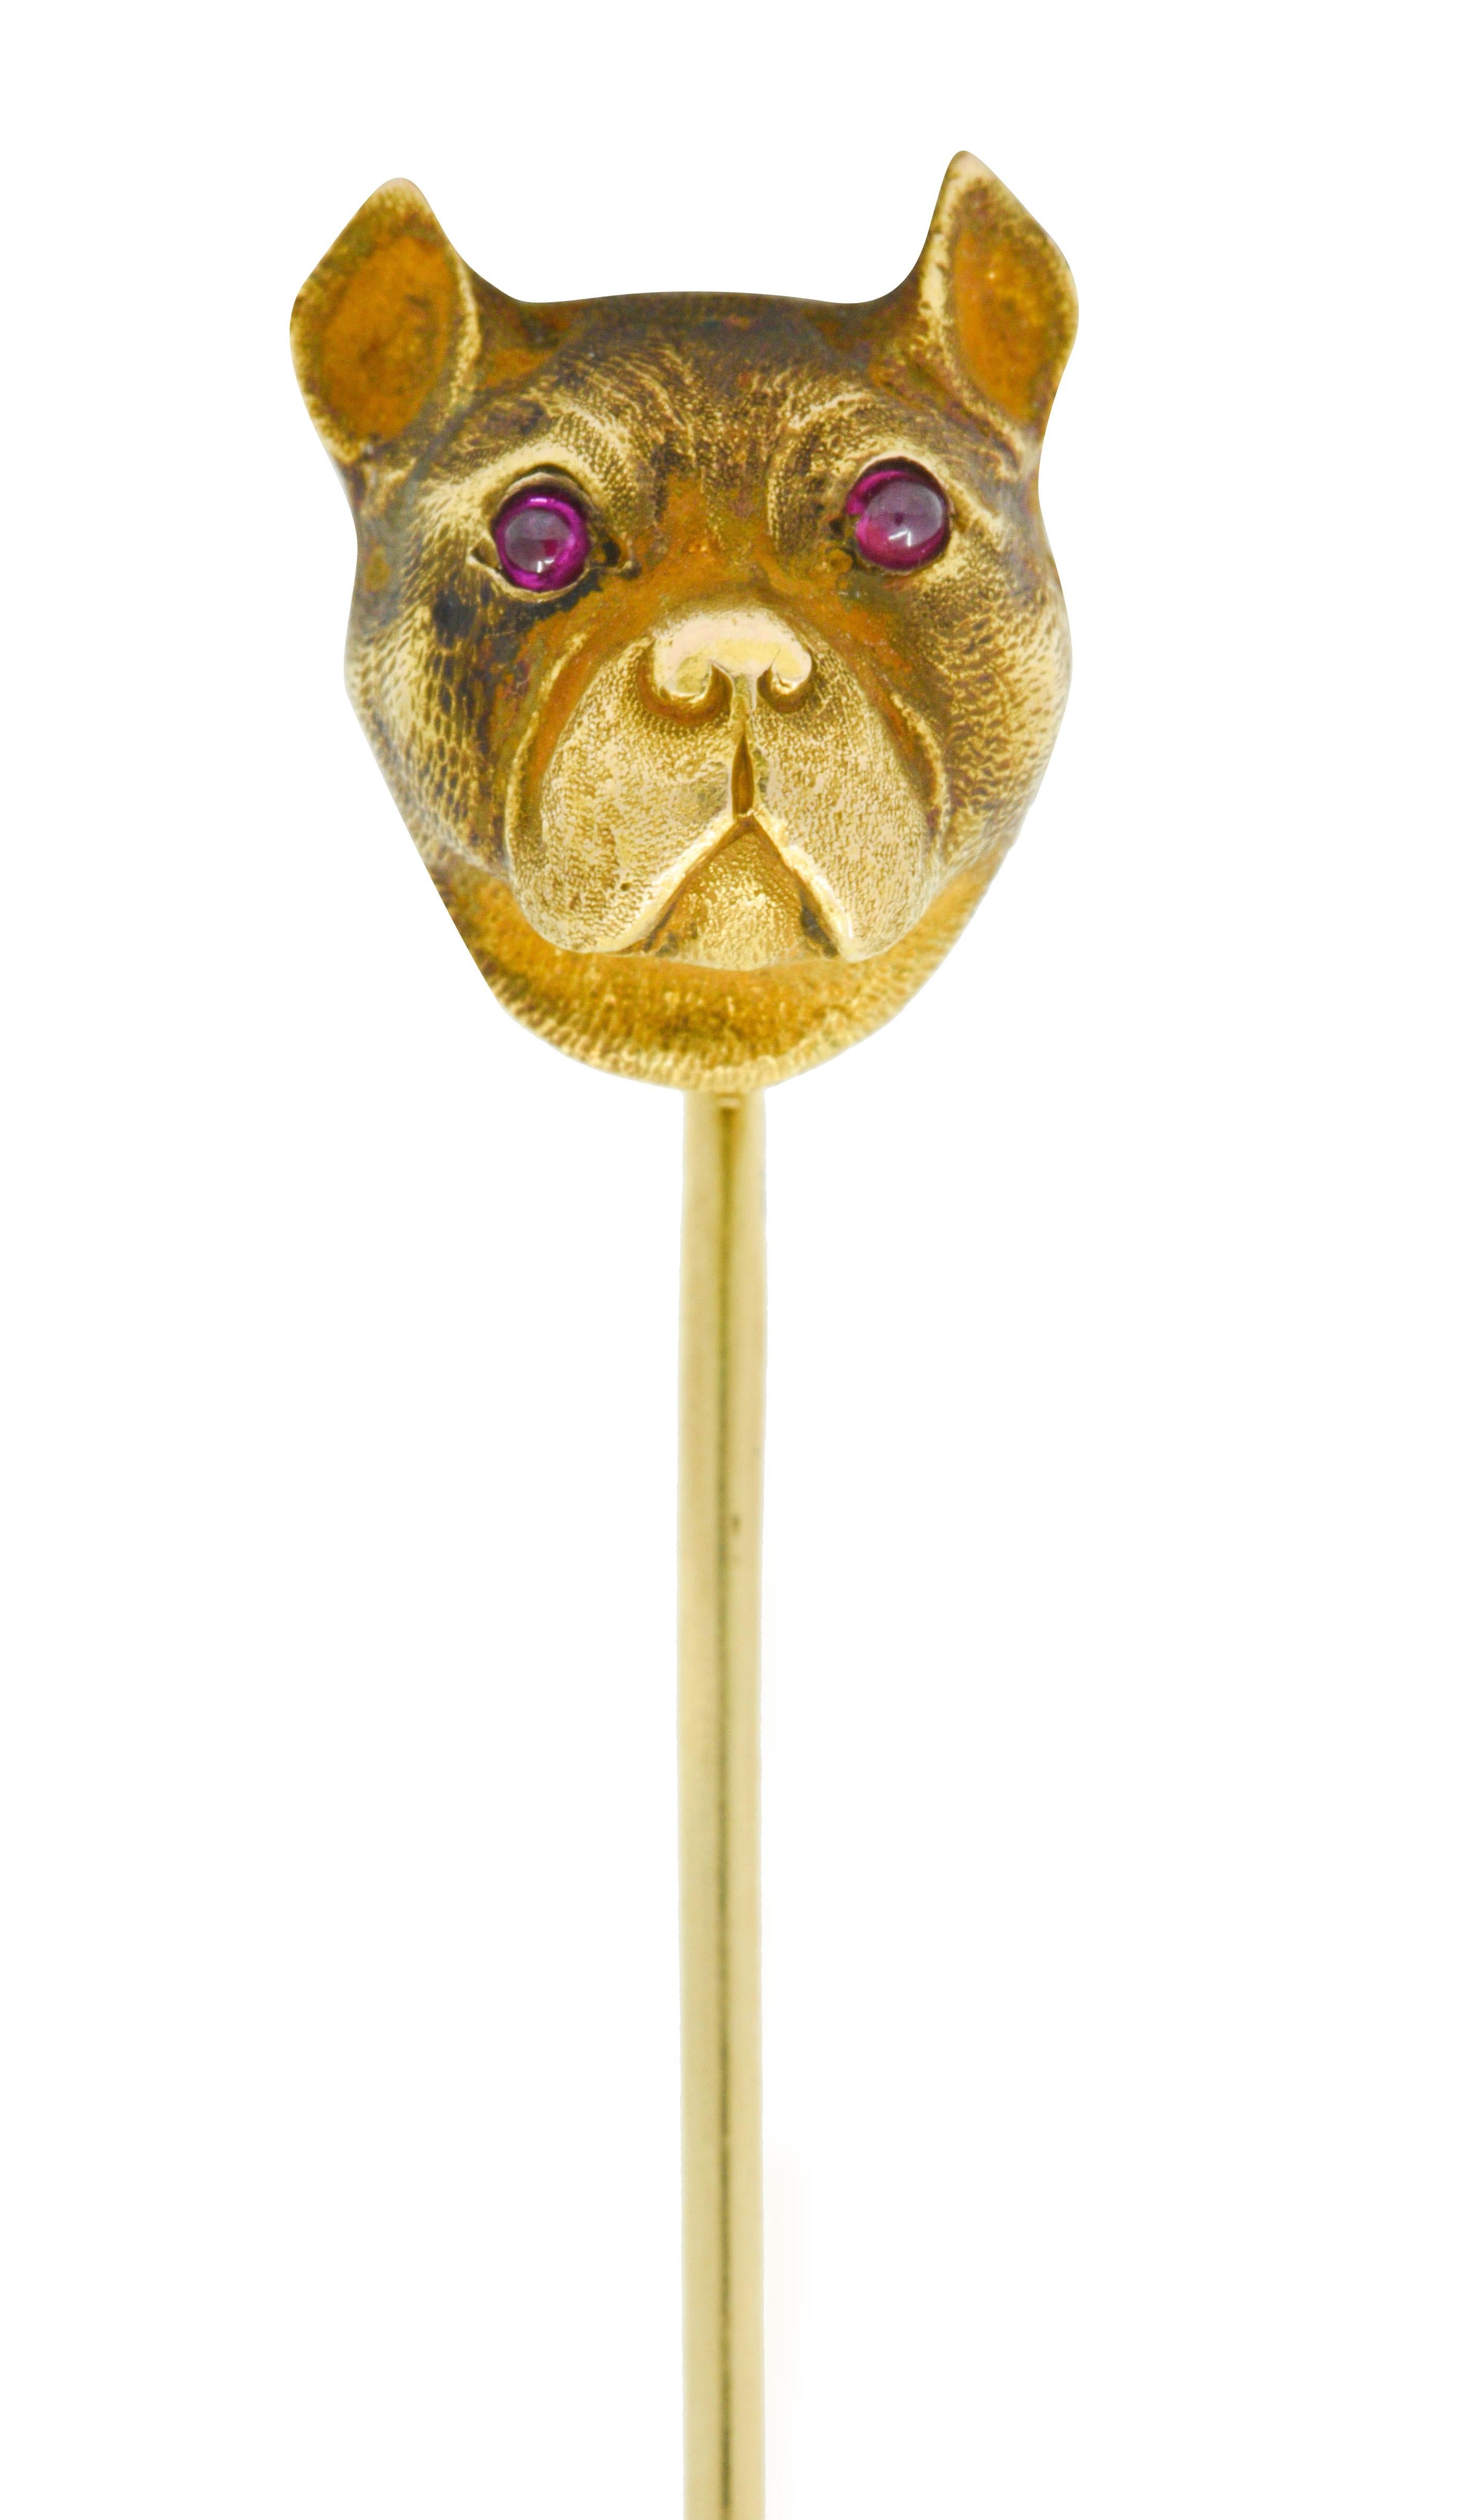 Depicting a highly rendered bust of a French Bulldog

With ruby cabochon eye accents

Stamped 14K for 14 karat gold

Maker's mark for Bippart & Co.

Circa: 1905

Dog measures: 7/16 x 1/2 inch

Total length: 2 1/4 inches

Total weight: 3.6